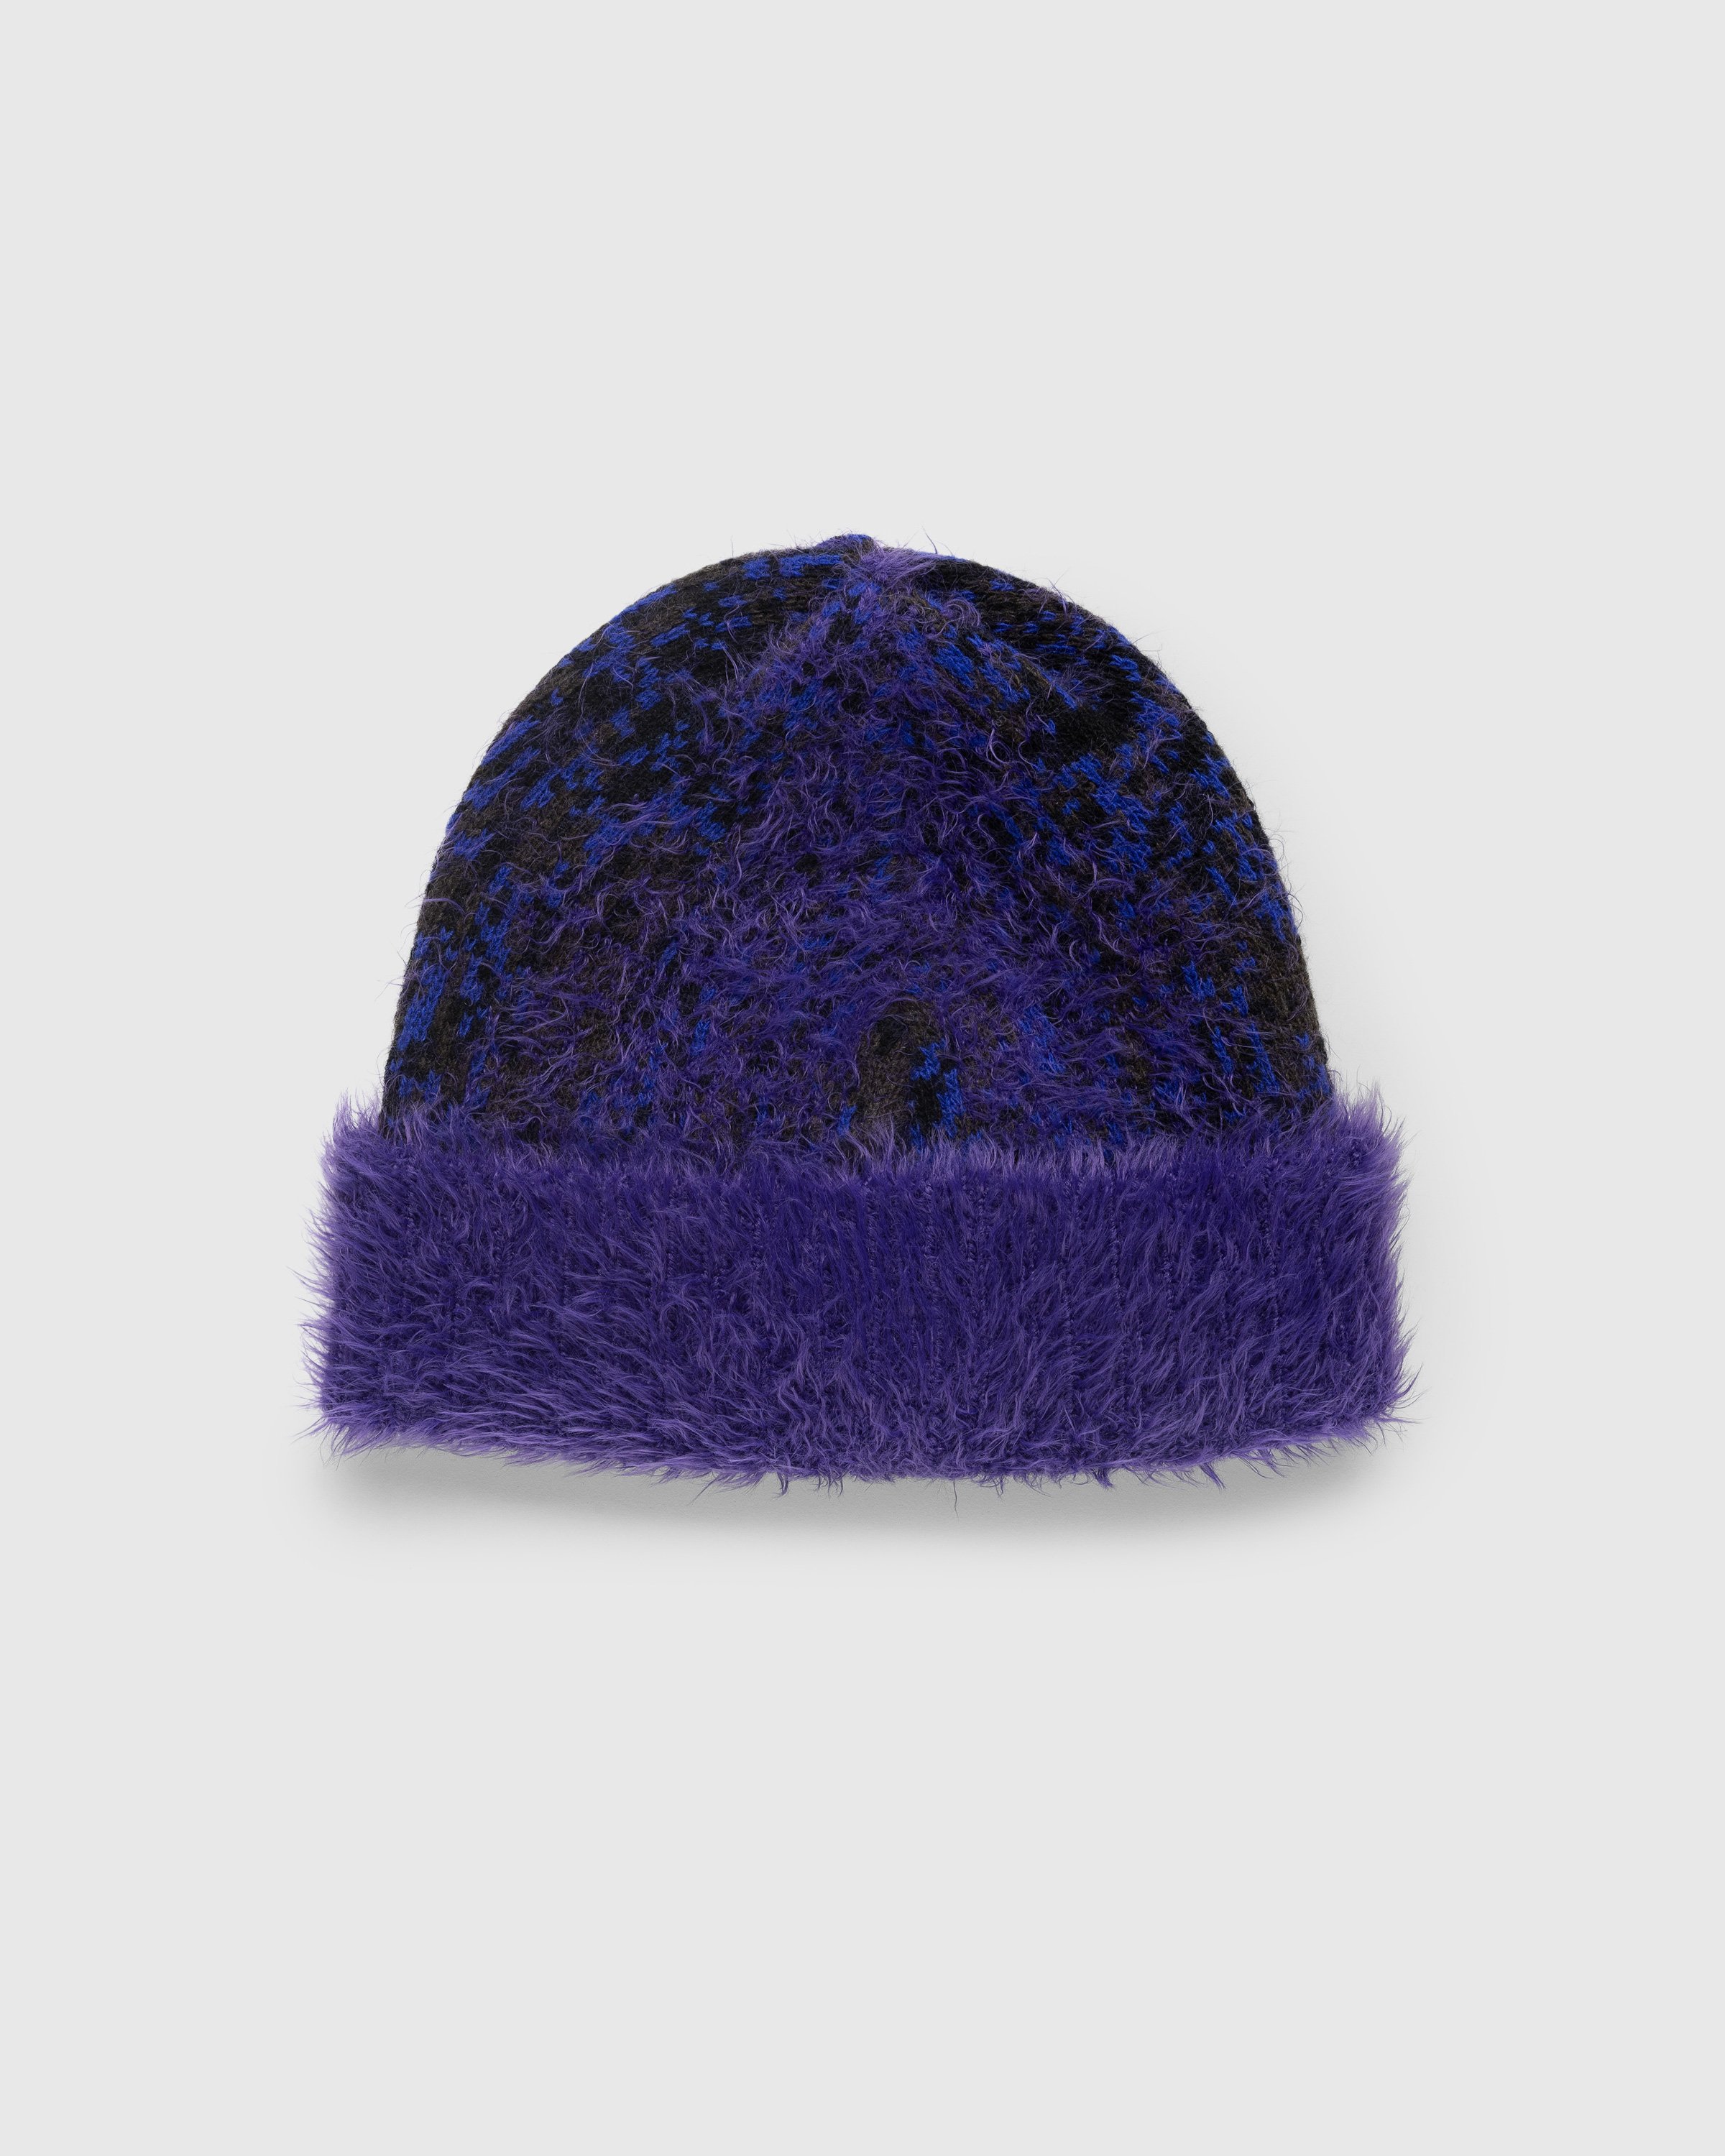 Y/Project - Gradient Hairy Knit Beanie Purple/Blue/Brown - Accessories - Multi - Image 1